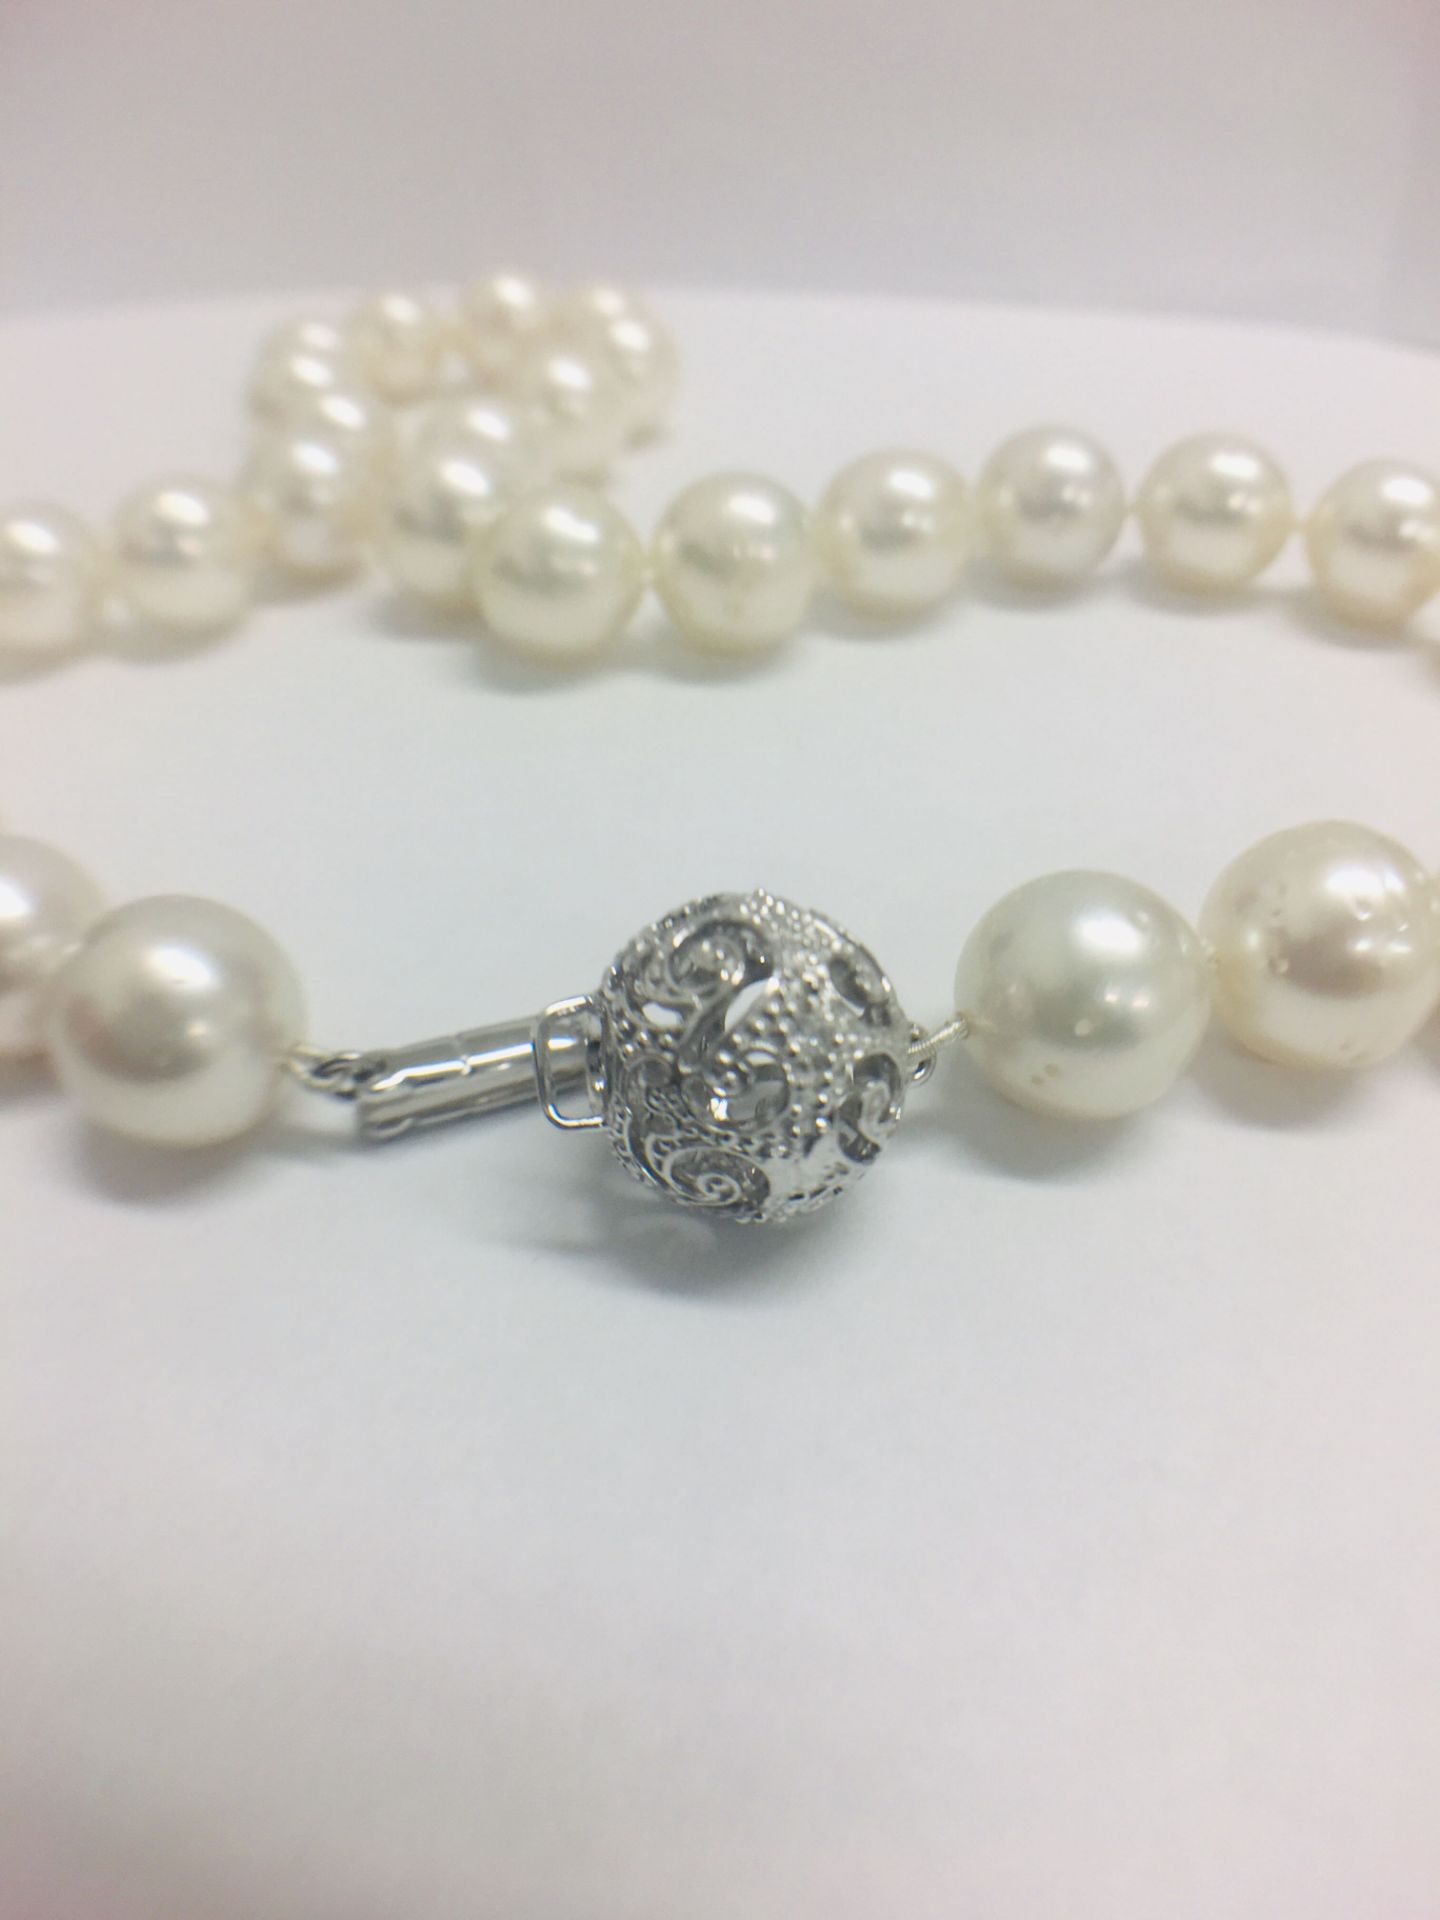 Strand 35 South Sea Pearls with 14ct White Gold Filagree Style Ball